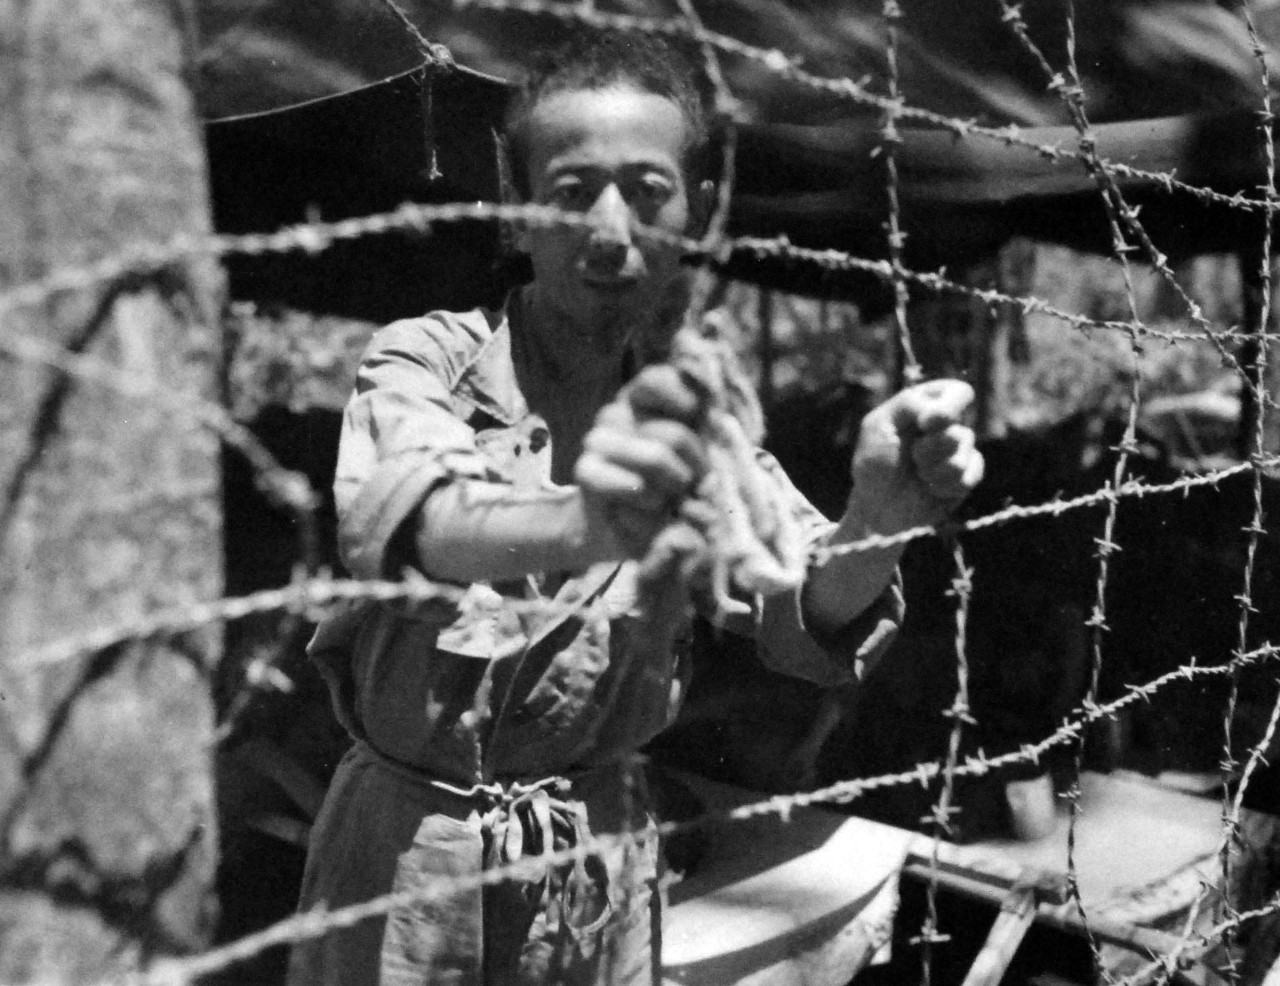 127-GW-971-89065:  Battle of Cape Gloucester, New Britain, December 1943-January 1944.  Japanese prisoner in brig at Cape Gloucester.  Photographed by Howard, March 1944.  Official U.S. Marine Corps Photograph, now in the collections of the National Archives.   (2014/7/9).